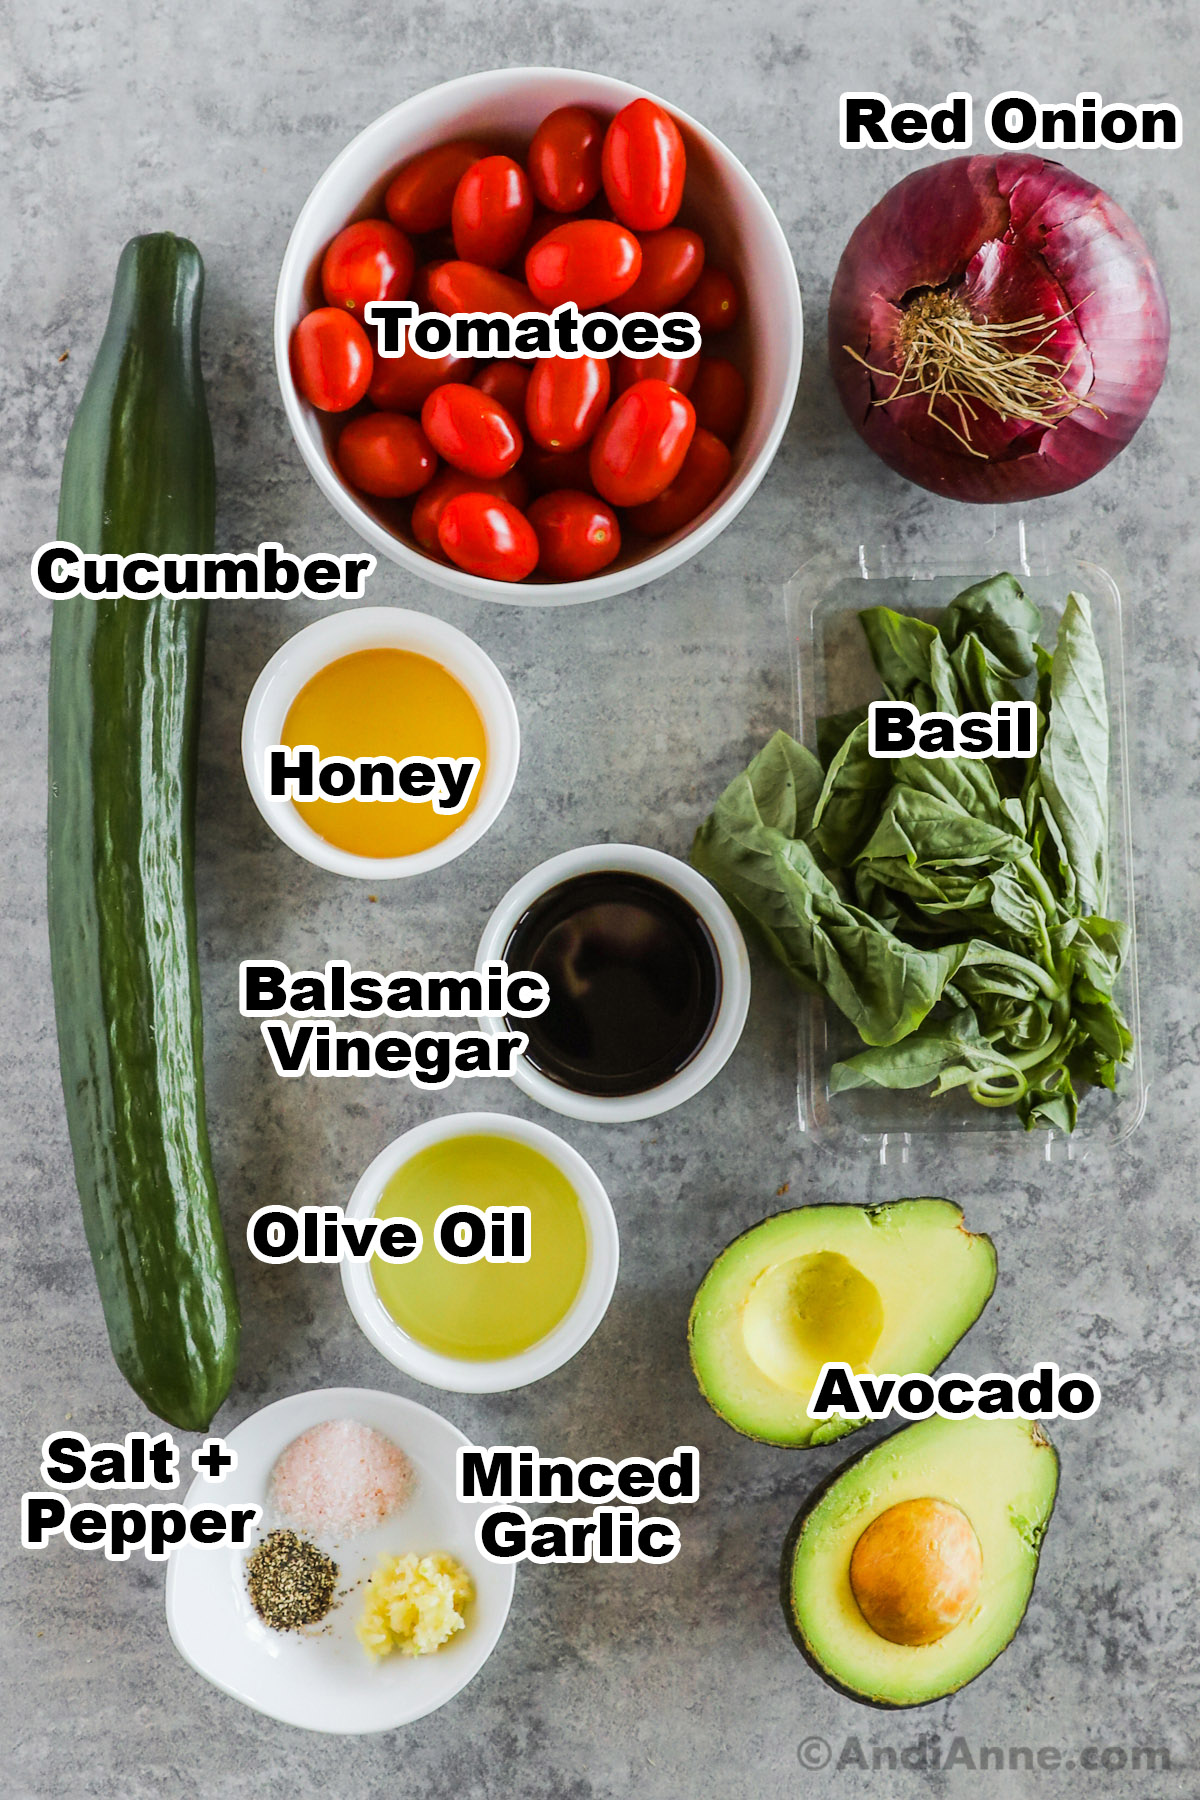 Recipe ingredients including bowl of grape tomatoes, a red onion, an english cucumber, a bunch of fresh basil, a sliced avocado, bowls of honey, balsamic vinegar, olive oil, and a plate with salt and pepper and minced garlic.